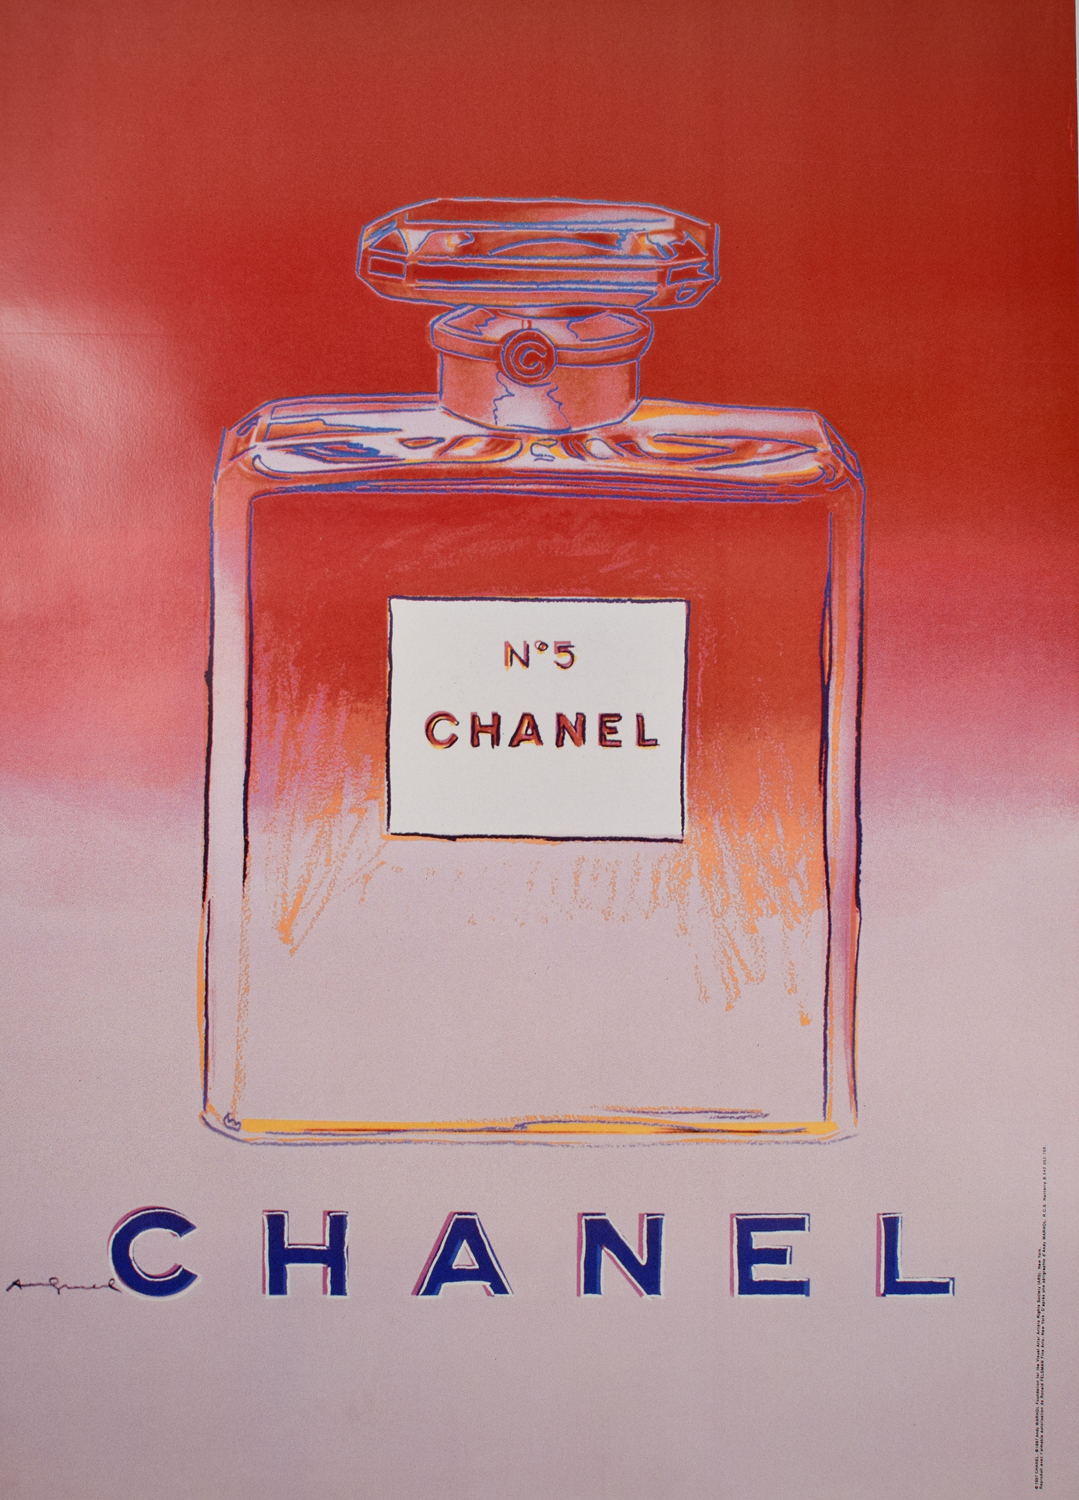 Chanel #5 Pink Designed by Andy Warhol